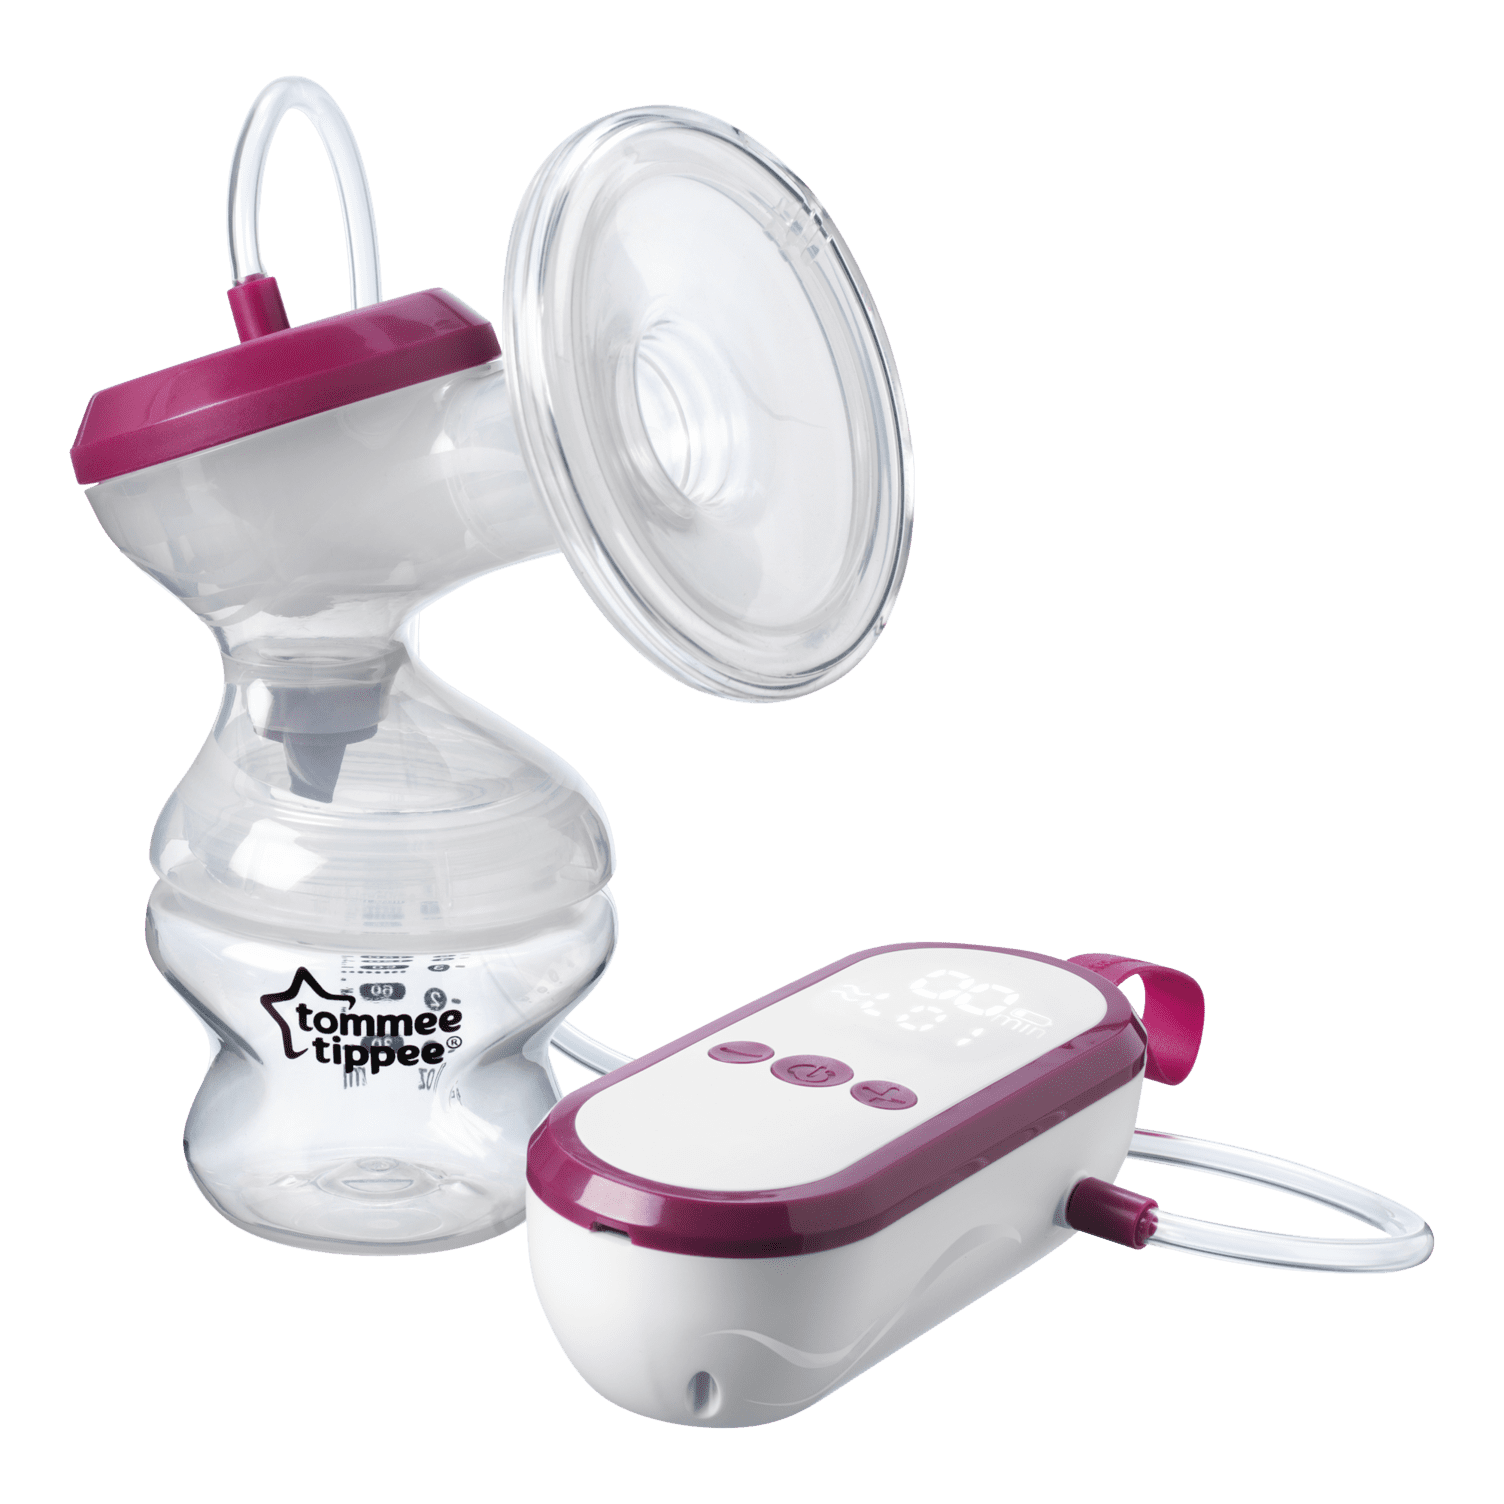 Tommee Tippee Made for Me Single Breast Walmart.com